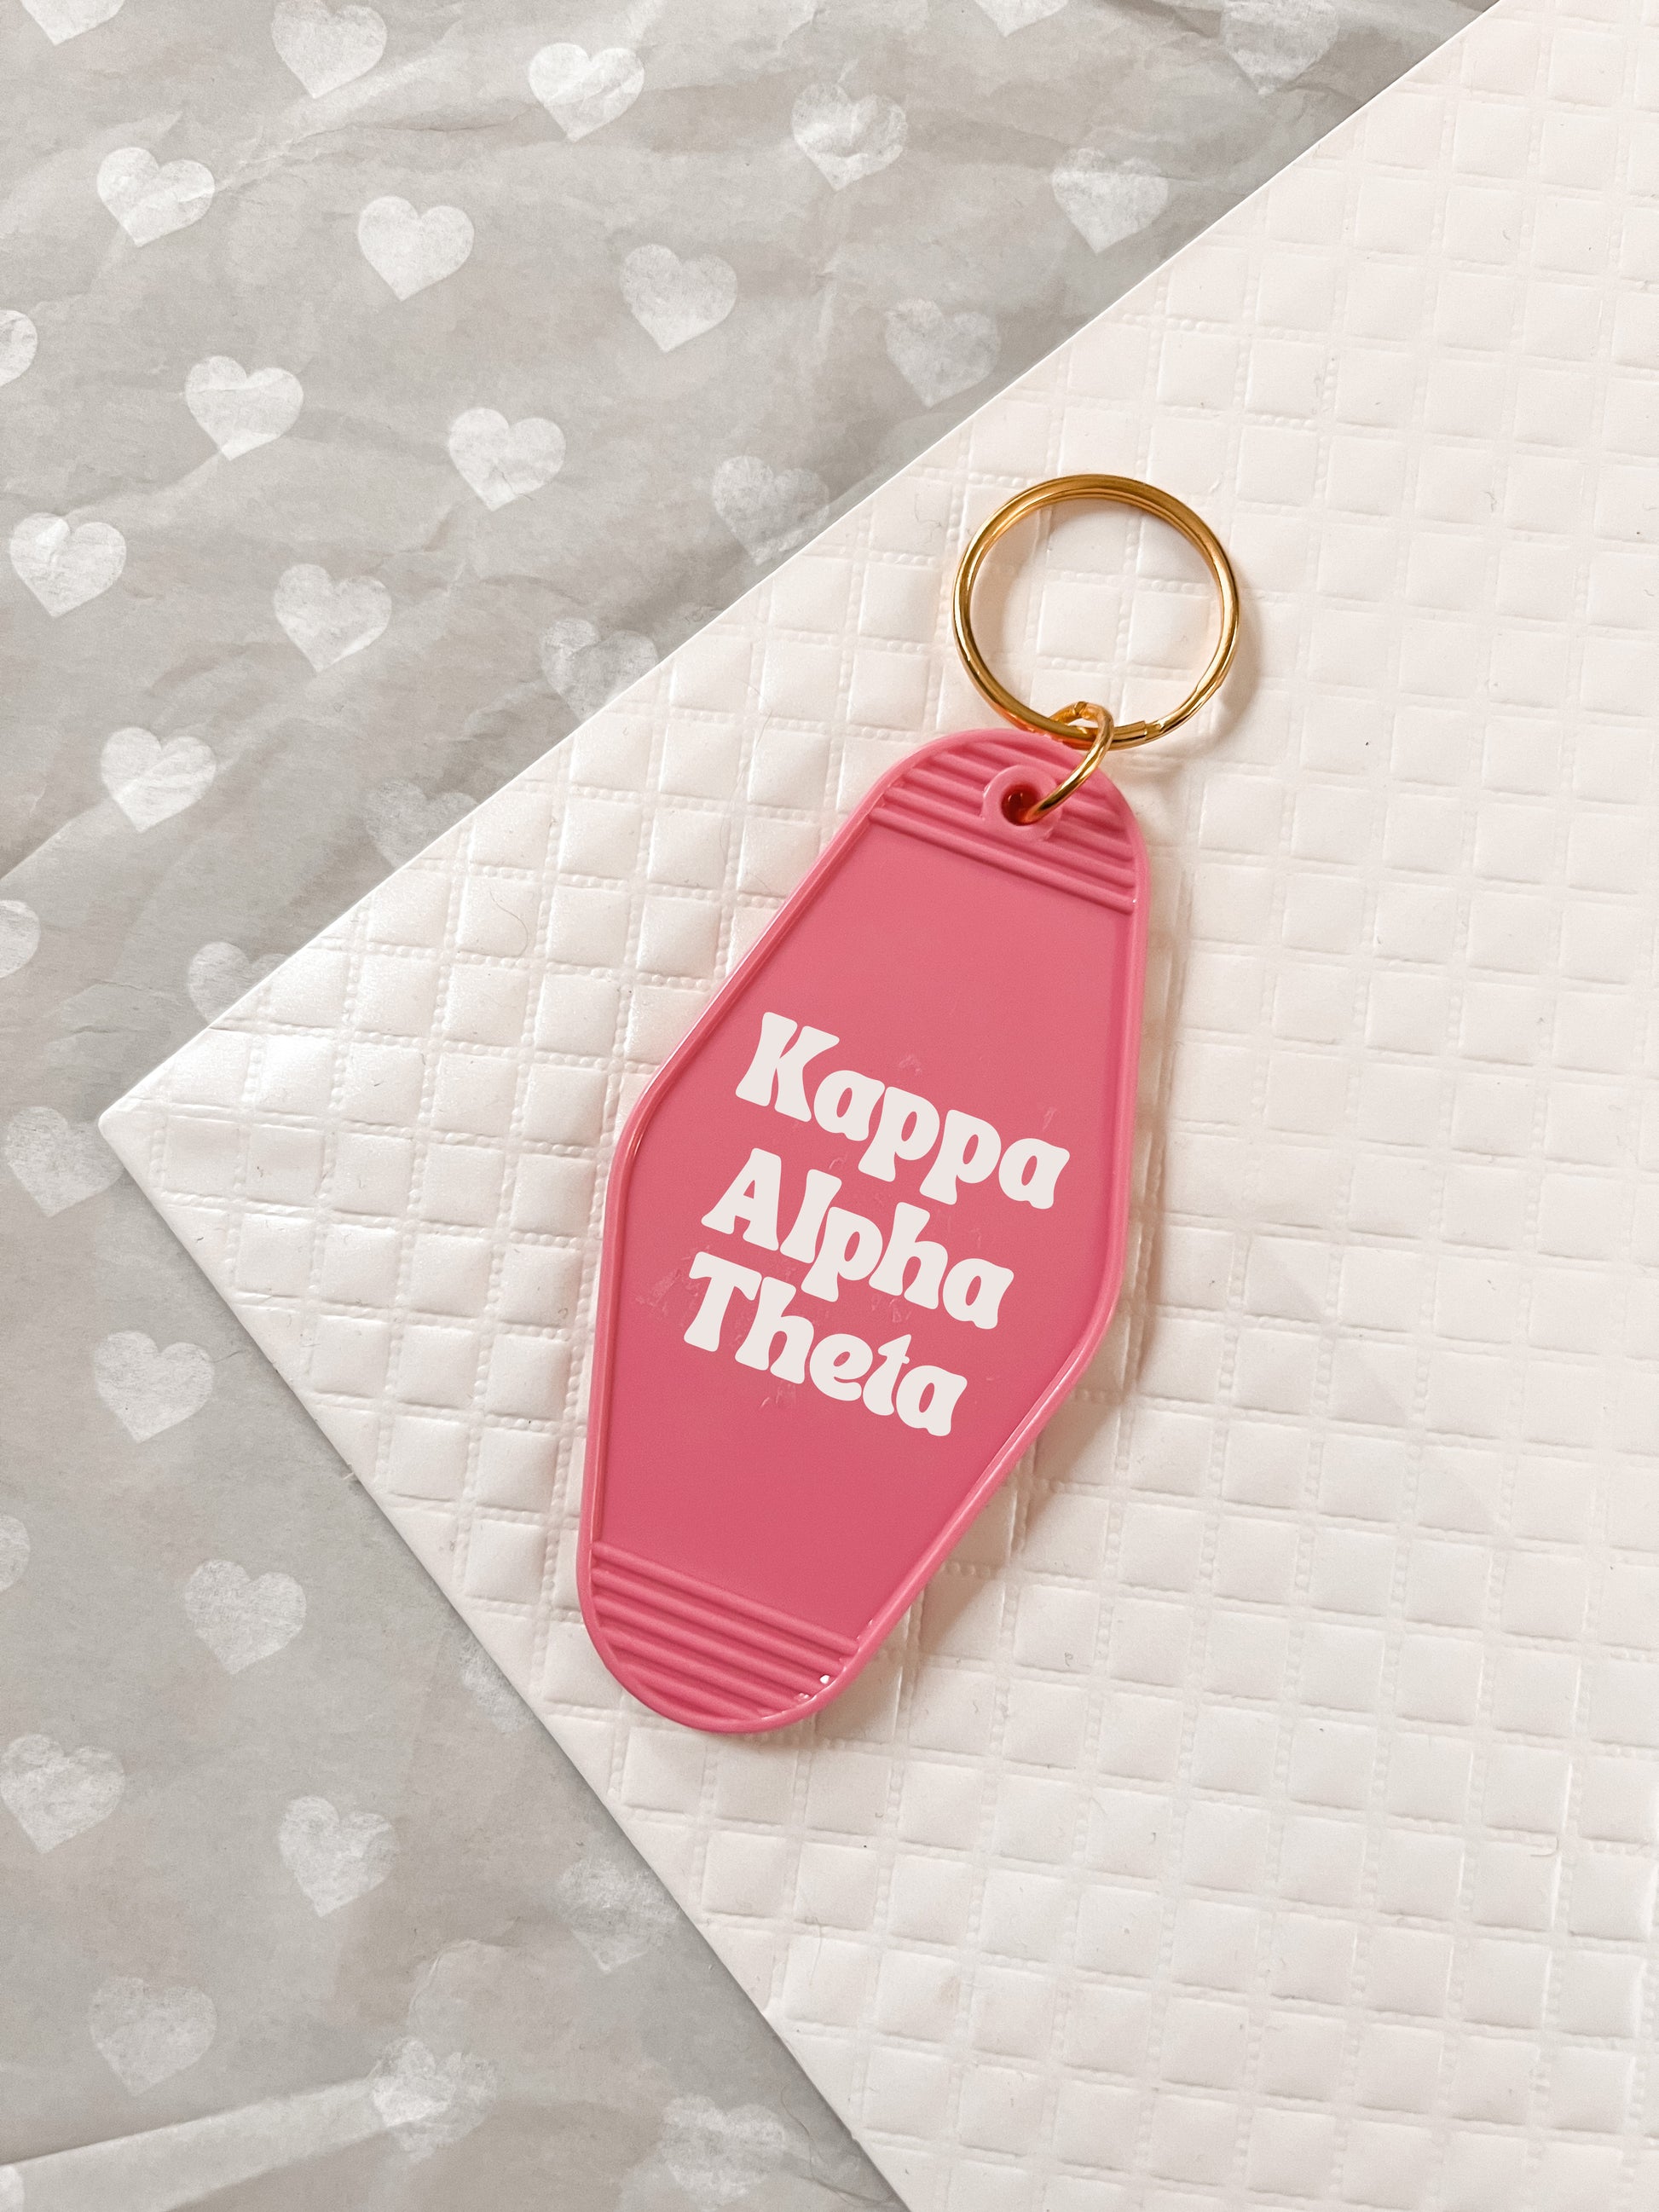 Kappa Alpha Theta Motel Hotel Key Chain in Hot pink with white letters and gold ring. KAT Theta